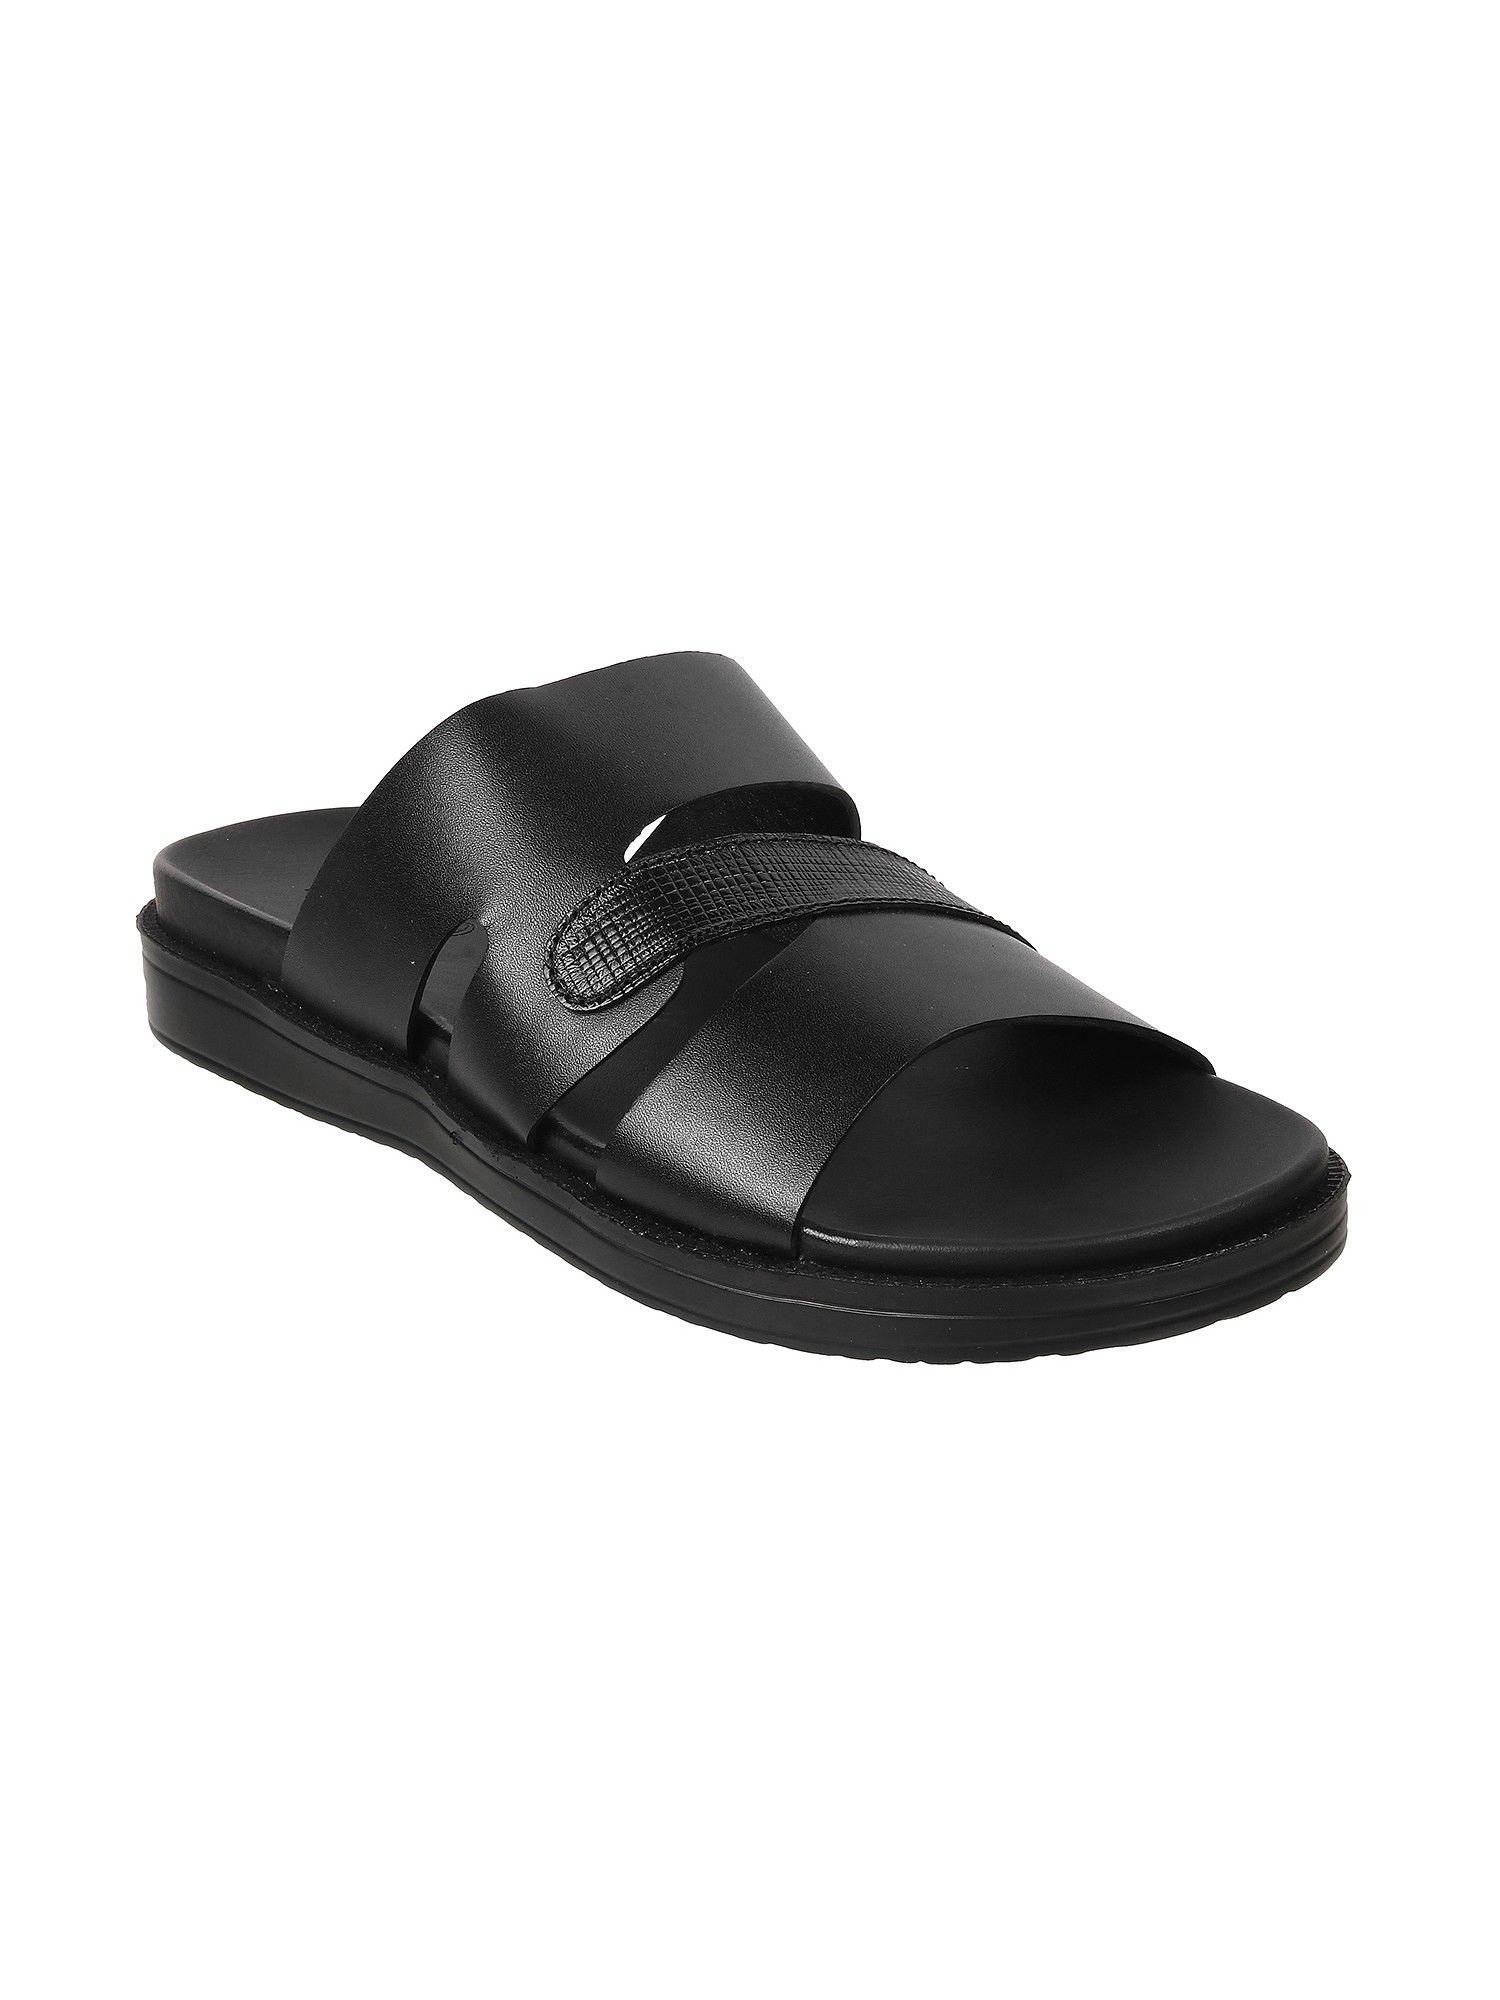 mens-black-synthetic-textured-sandals